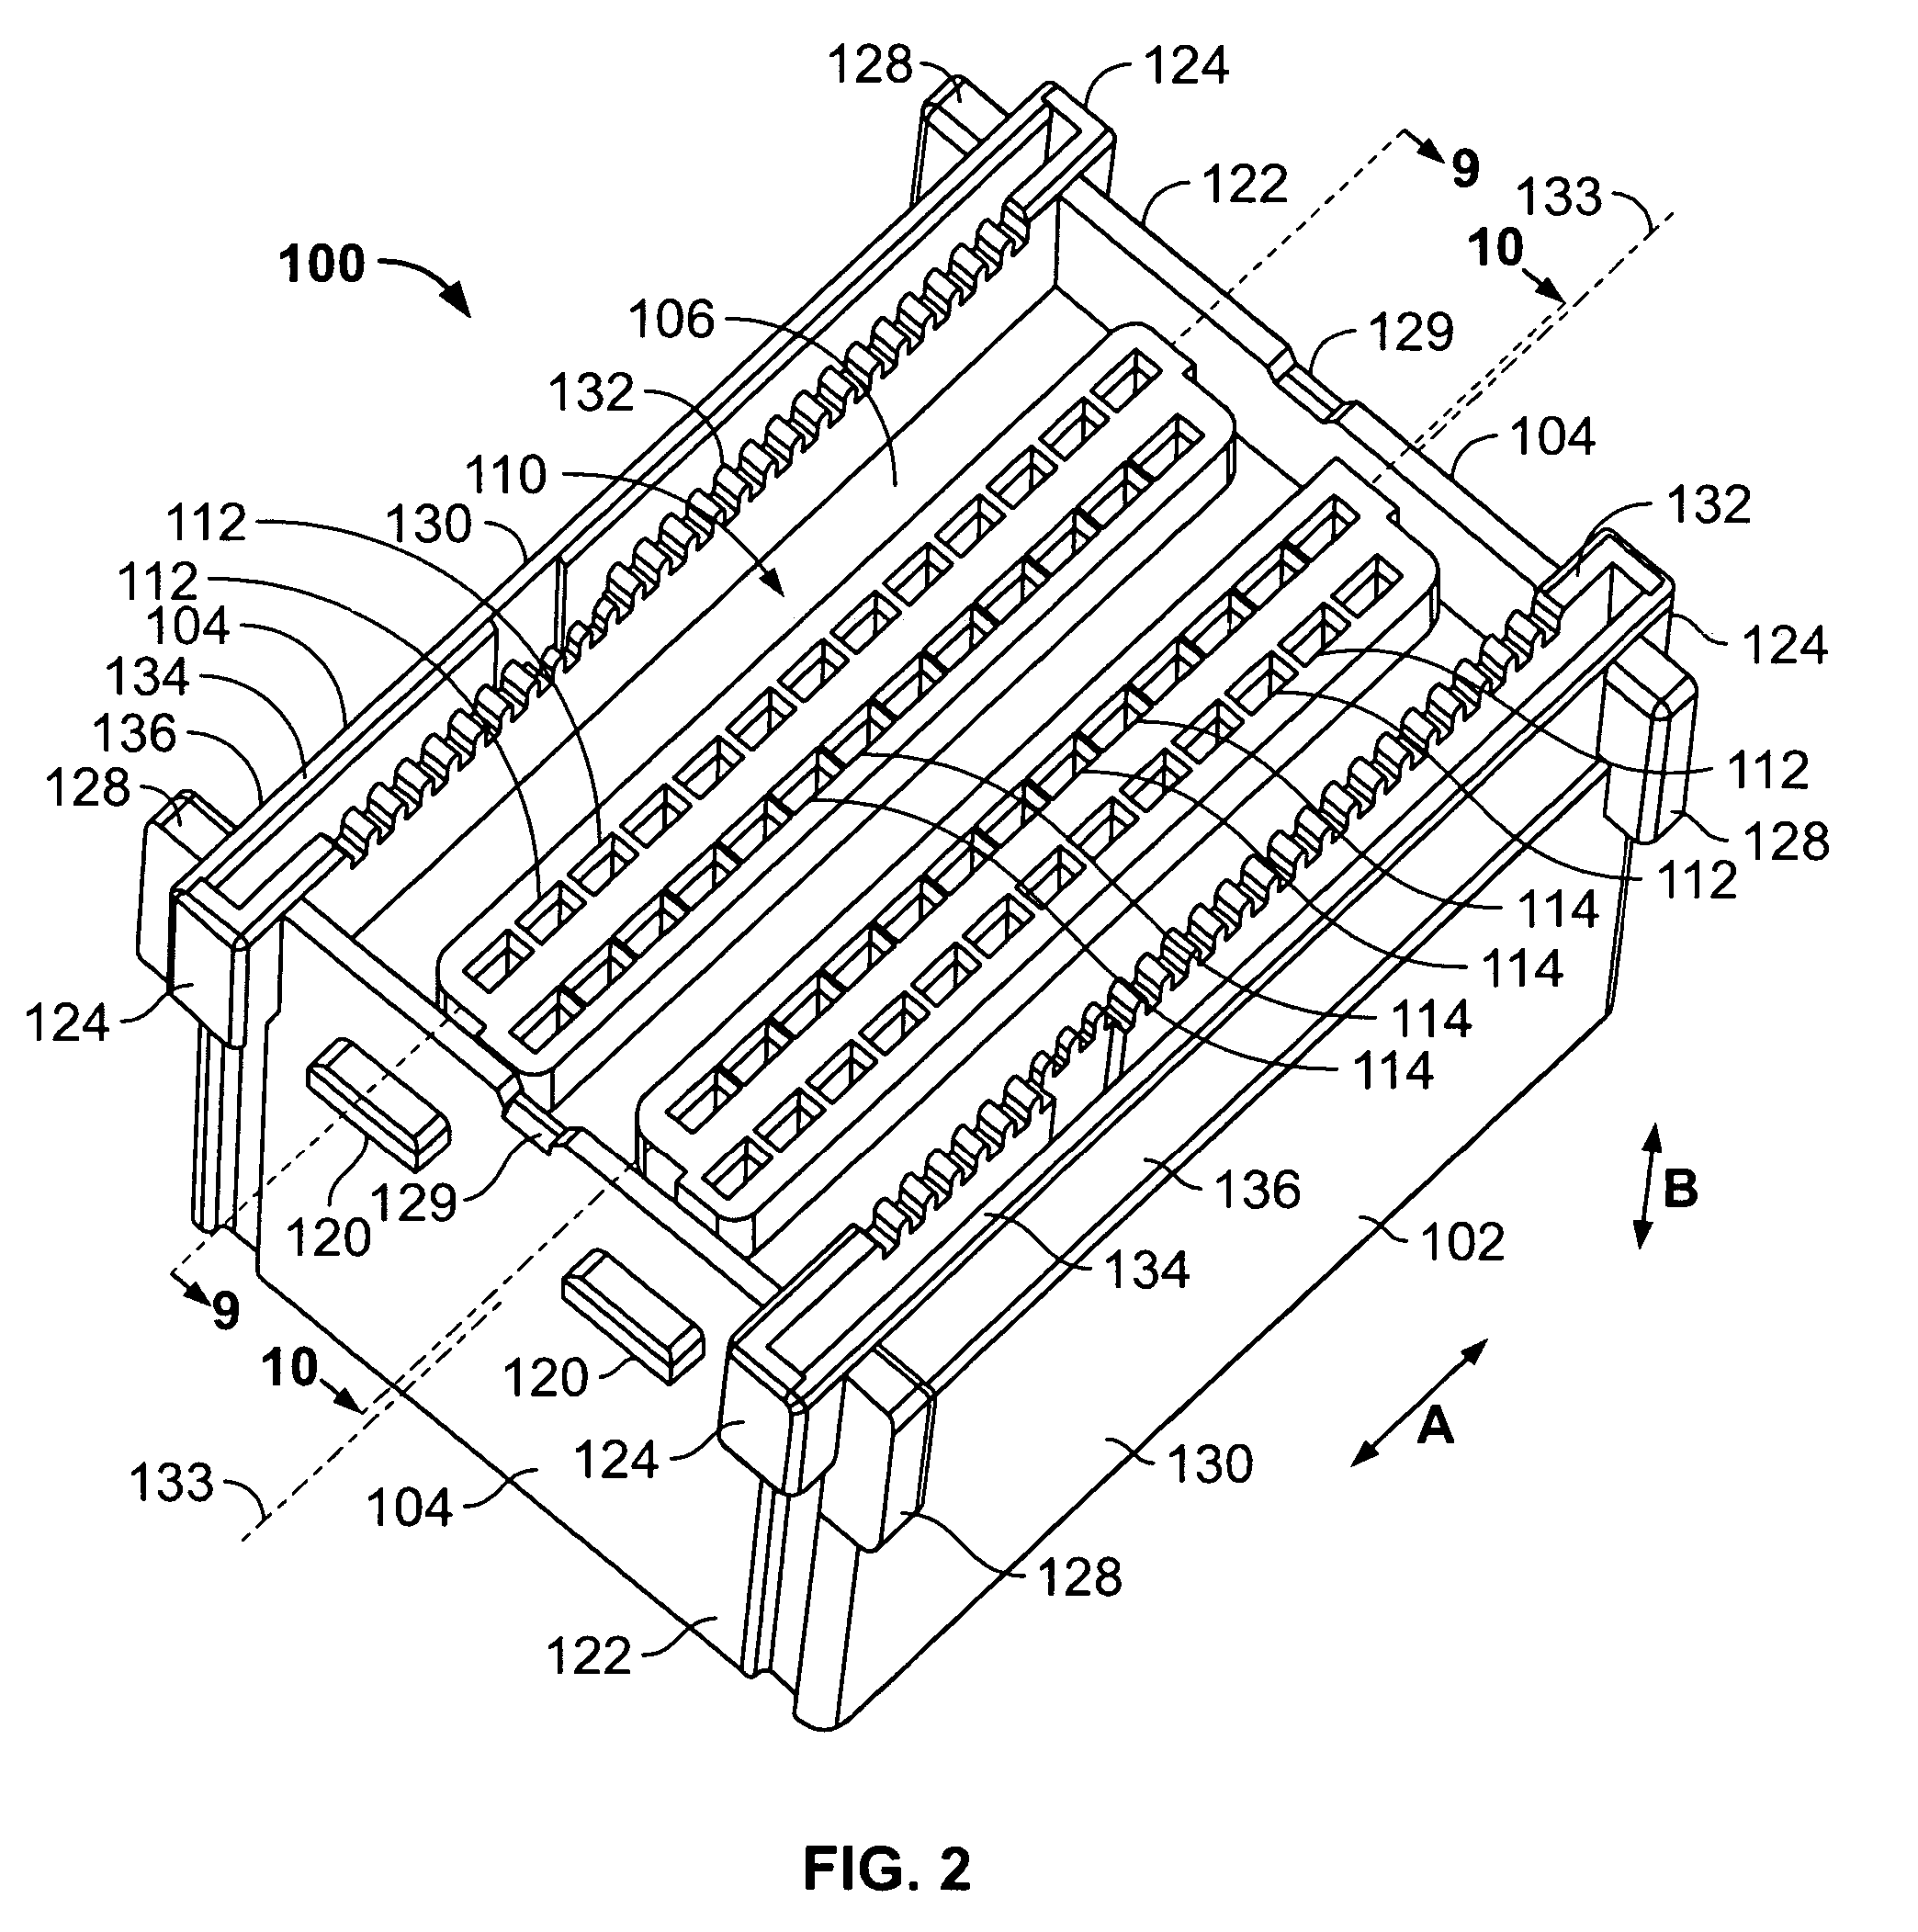 Two piece surface mount header assembly having a contact alignment member